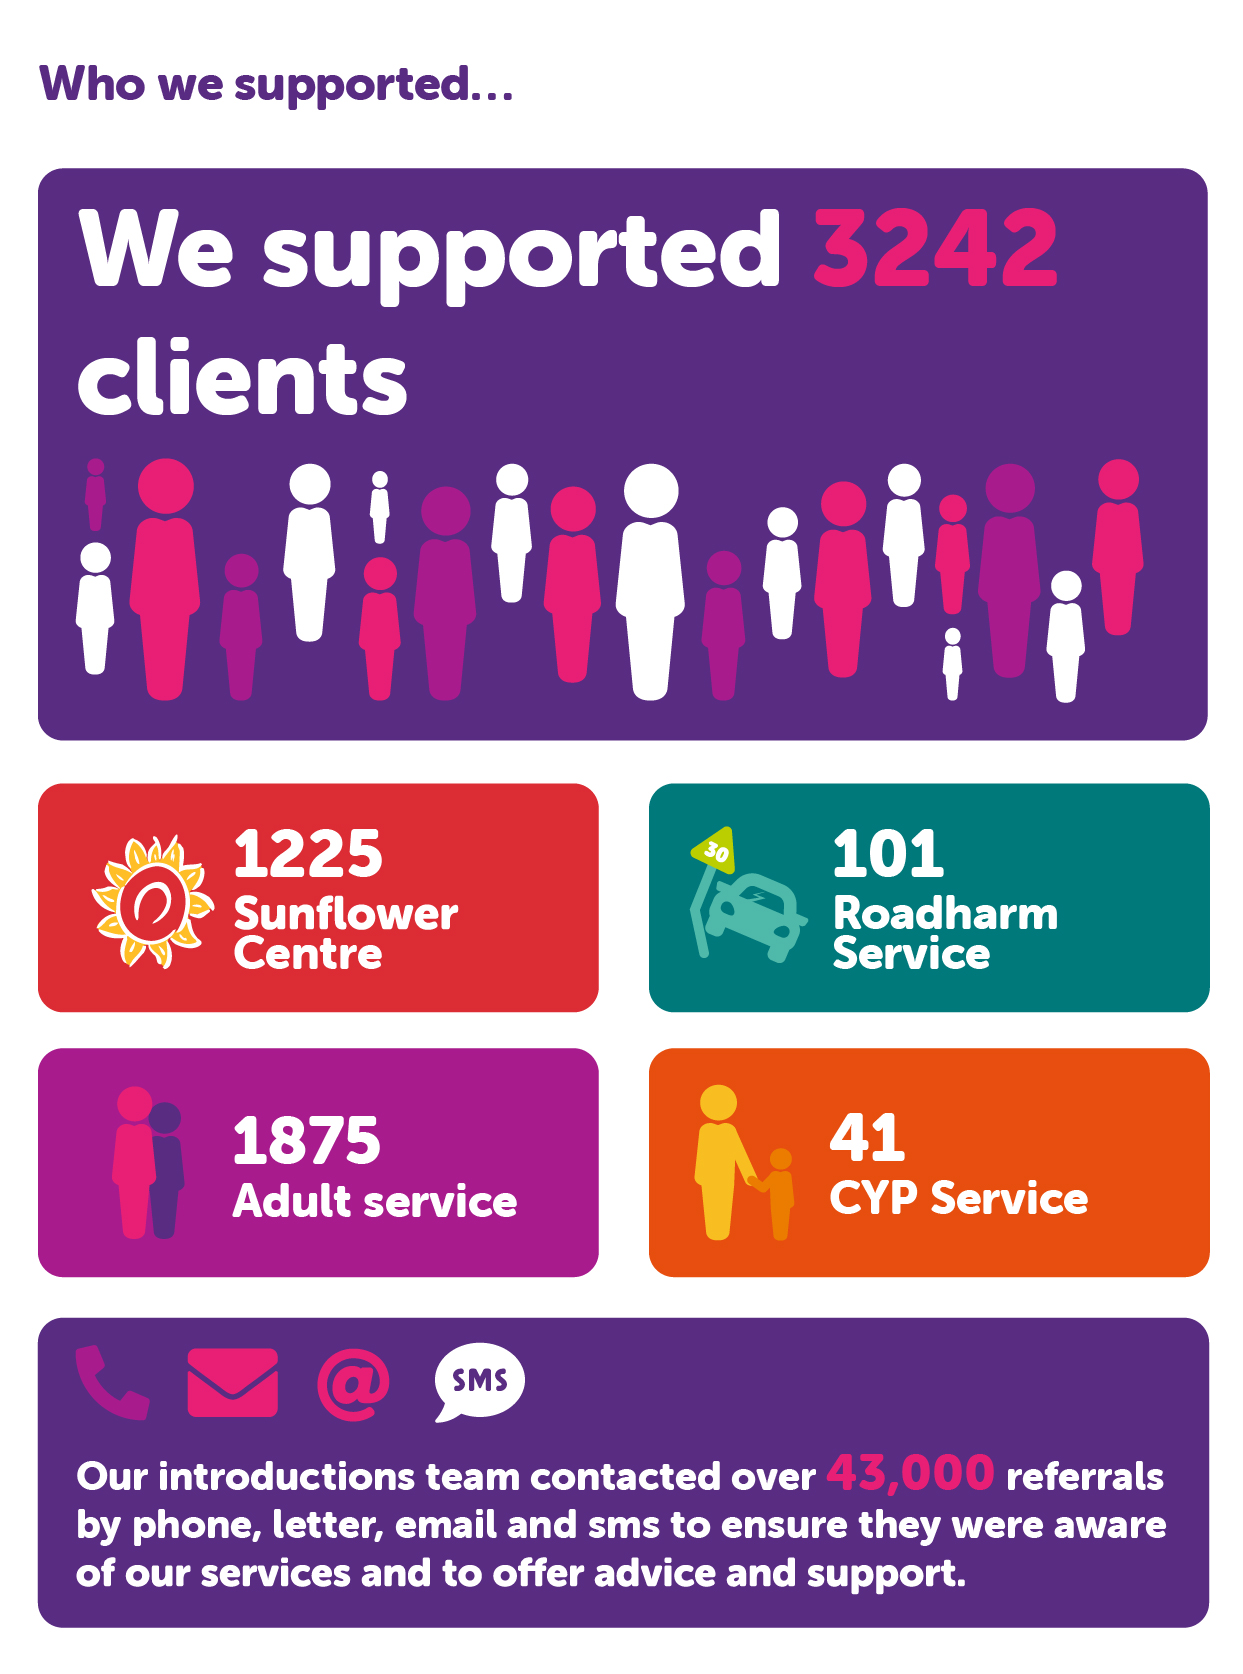 Who we supported… We supported 3242 clients 1225 Sunflower Centre 101 Roadharm Service 1875 Adult service 41 CYP Service Our introductions team contacted over 43,000 referrals by phone, letter, email and sms to ensure they were aware of our services and to offer advice and support.